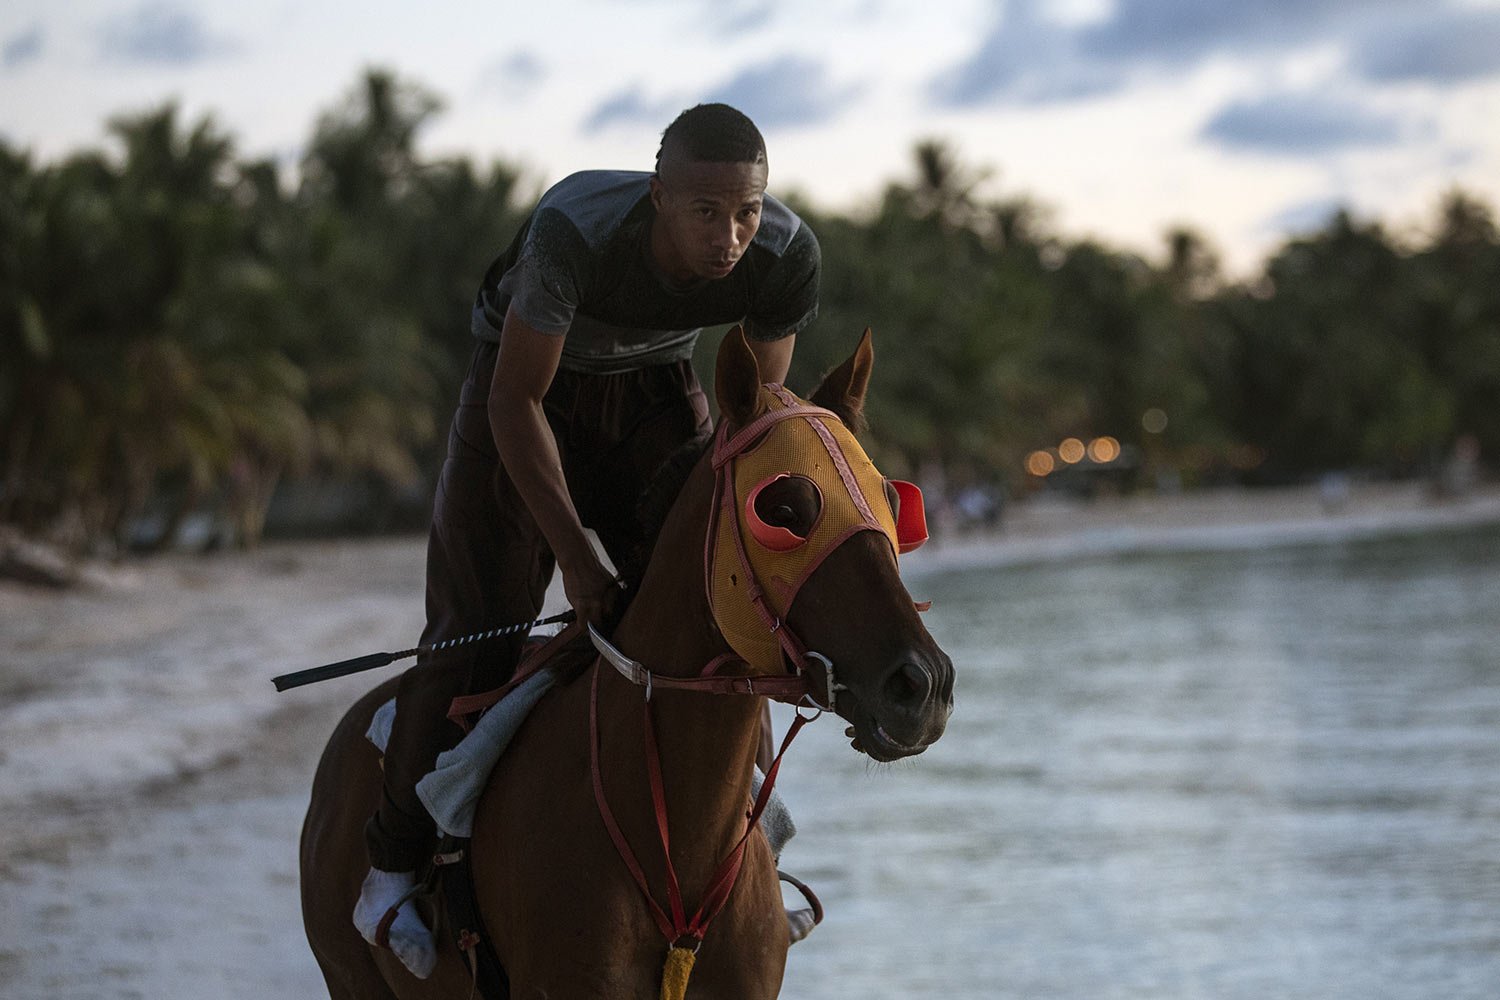  Horse trainer Jose Guerrero rides one of his thoroughbred horses on San Andres Island in Colombia, early Tuesday, Nov. 8, 2022. Guerrero, also a jockey, doesn't wear shoes when training on the beach. (AP Photo/Ivan Valencia) 